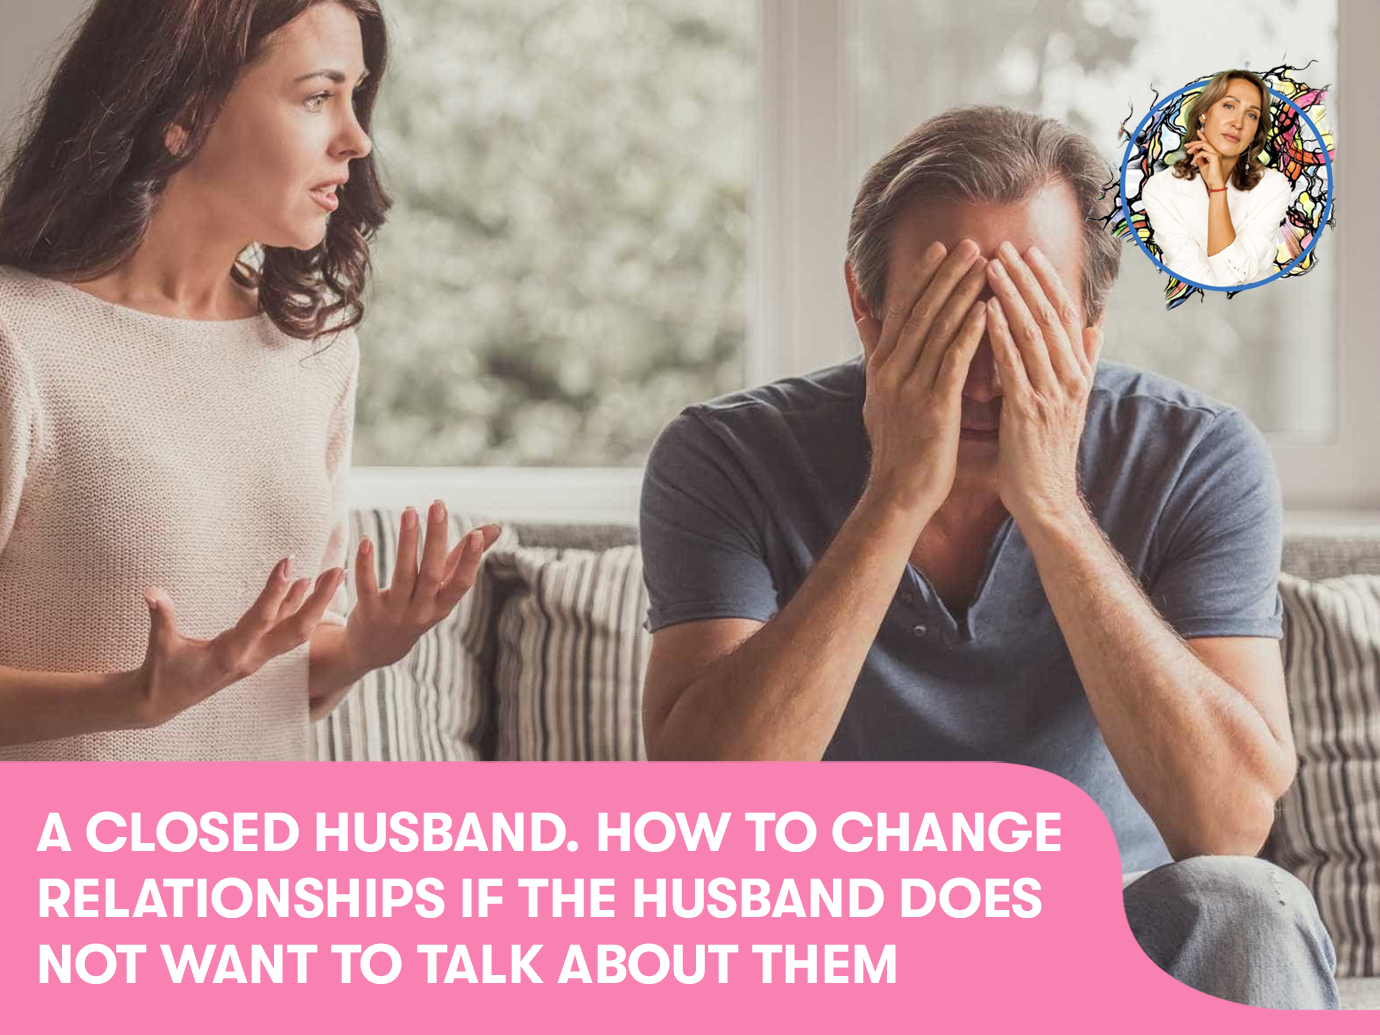 A CLOSED HUSBAND How to change relationships if the husband does not want to talk about them